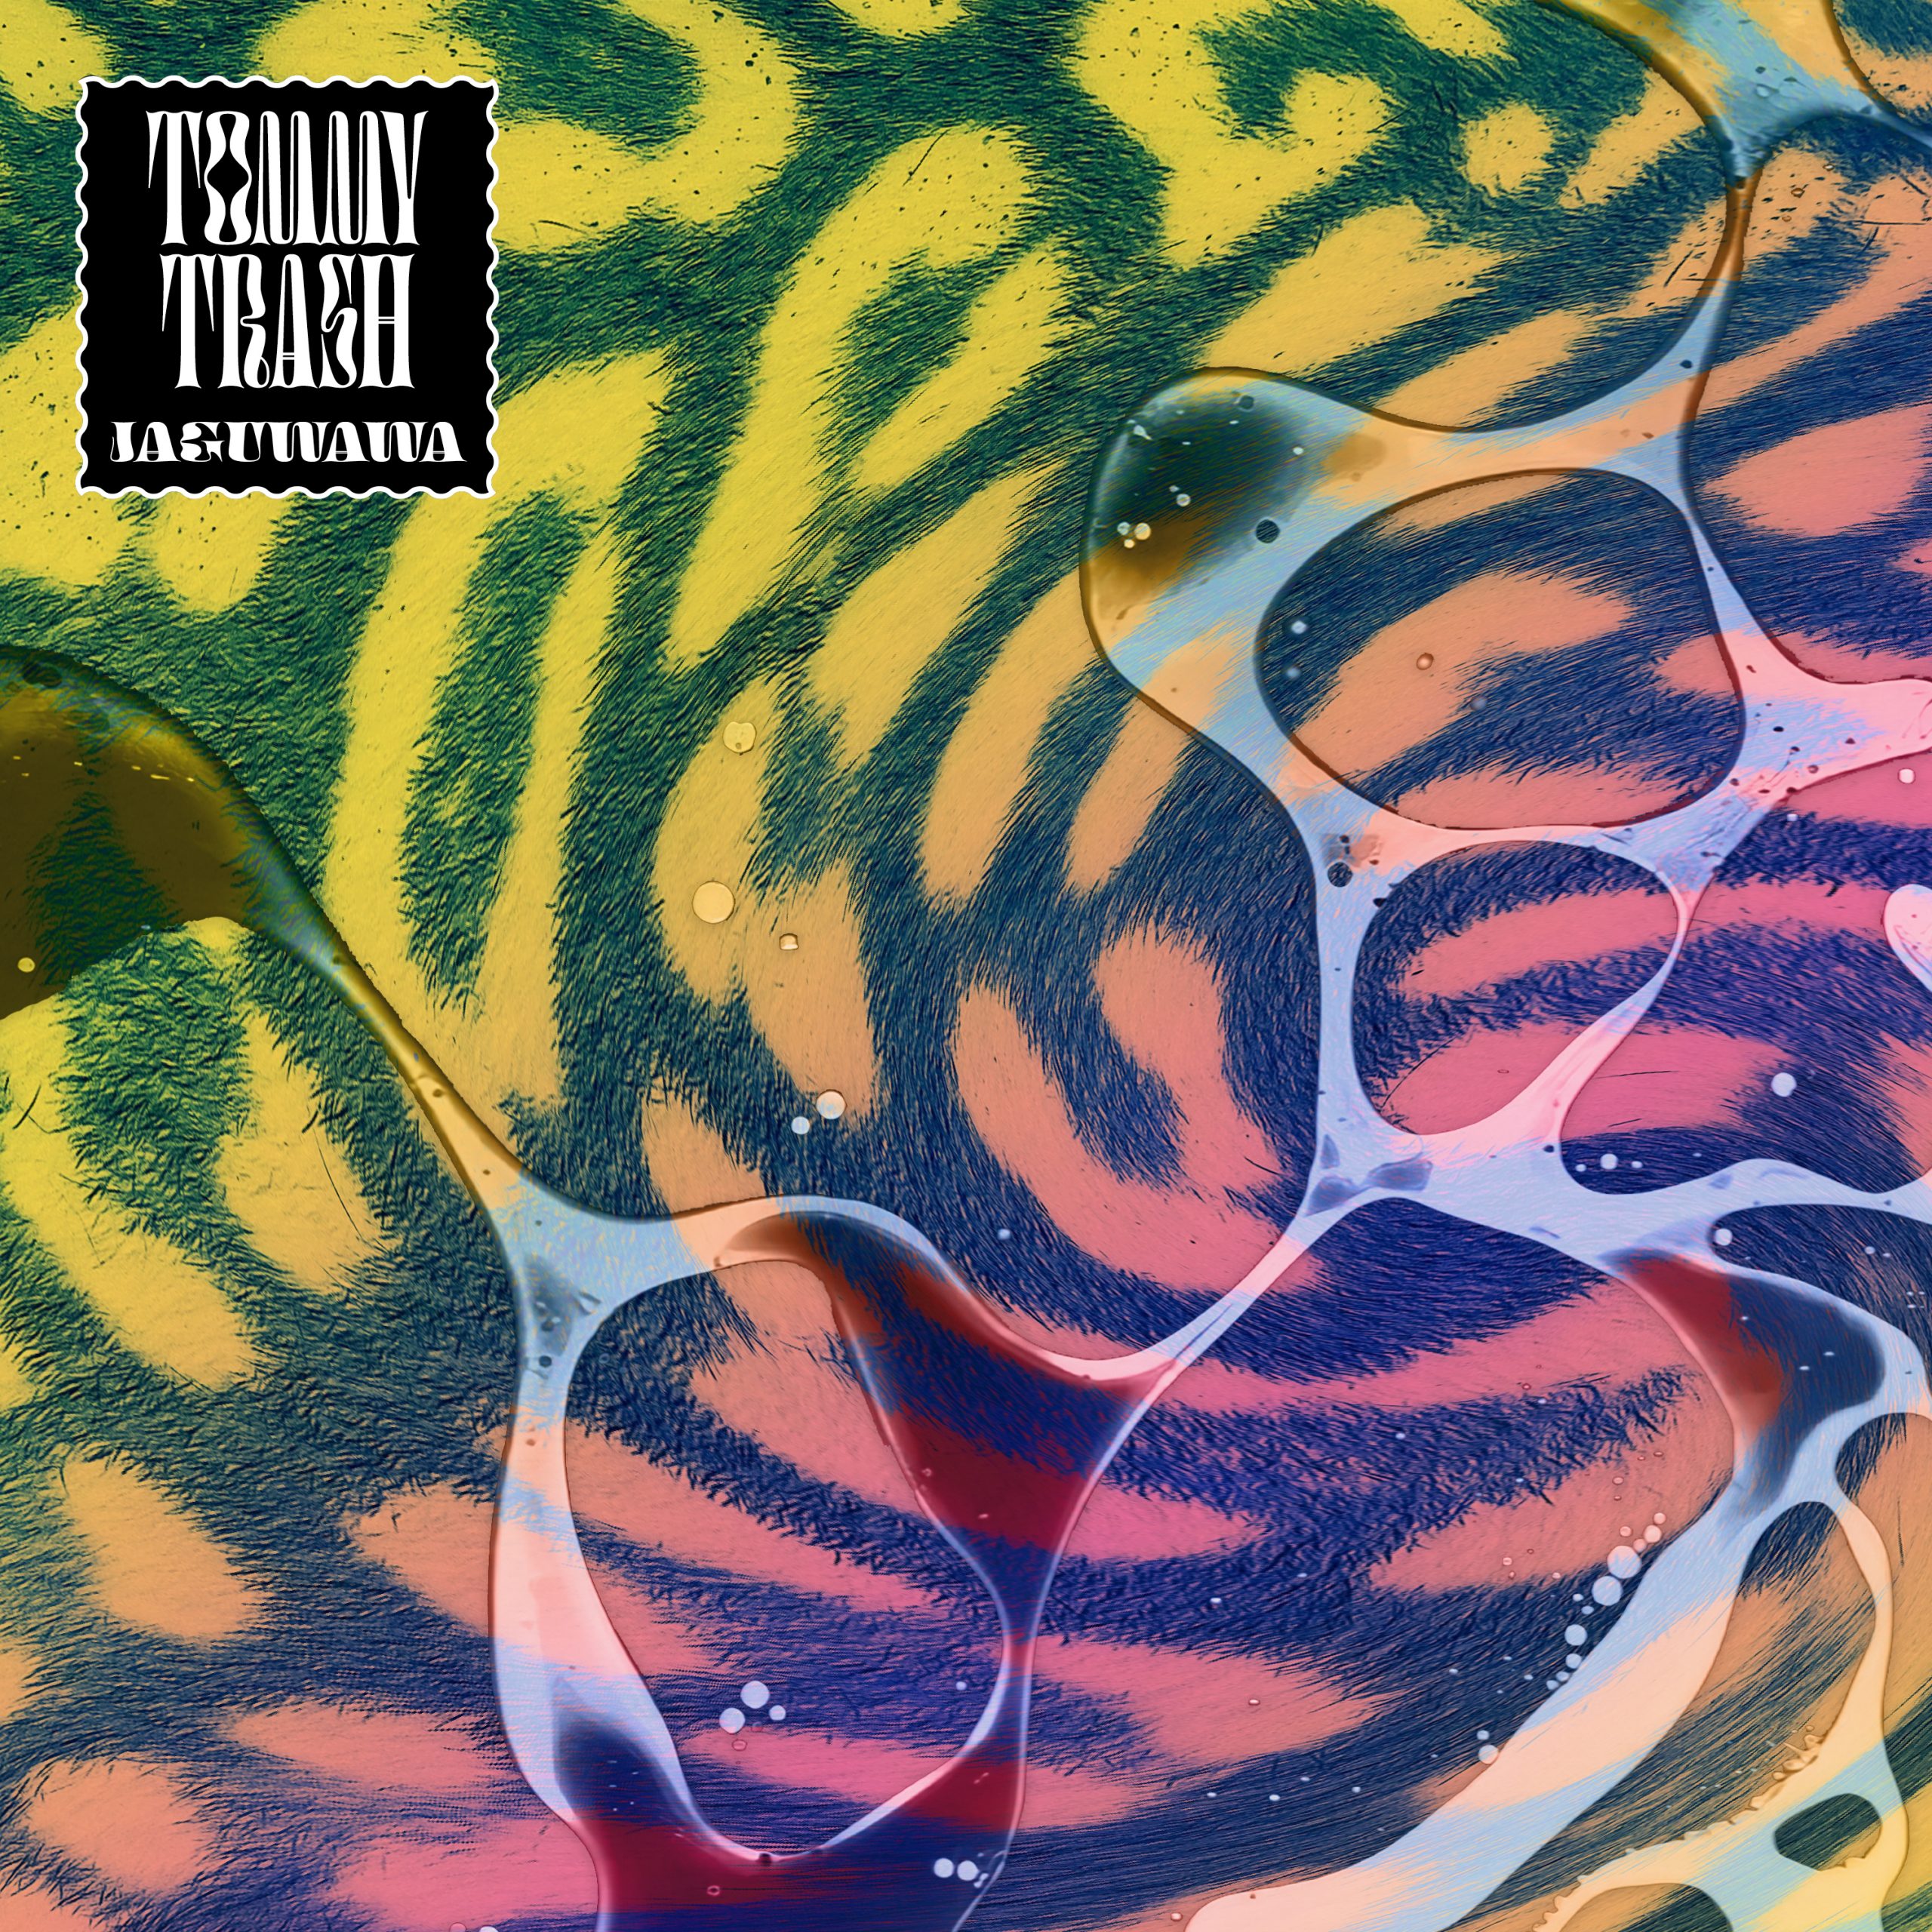 Tommy Trash Debuts New Single “Jaguwawa” Available Now via Sweat It Out